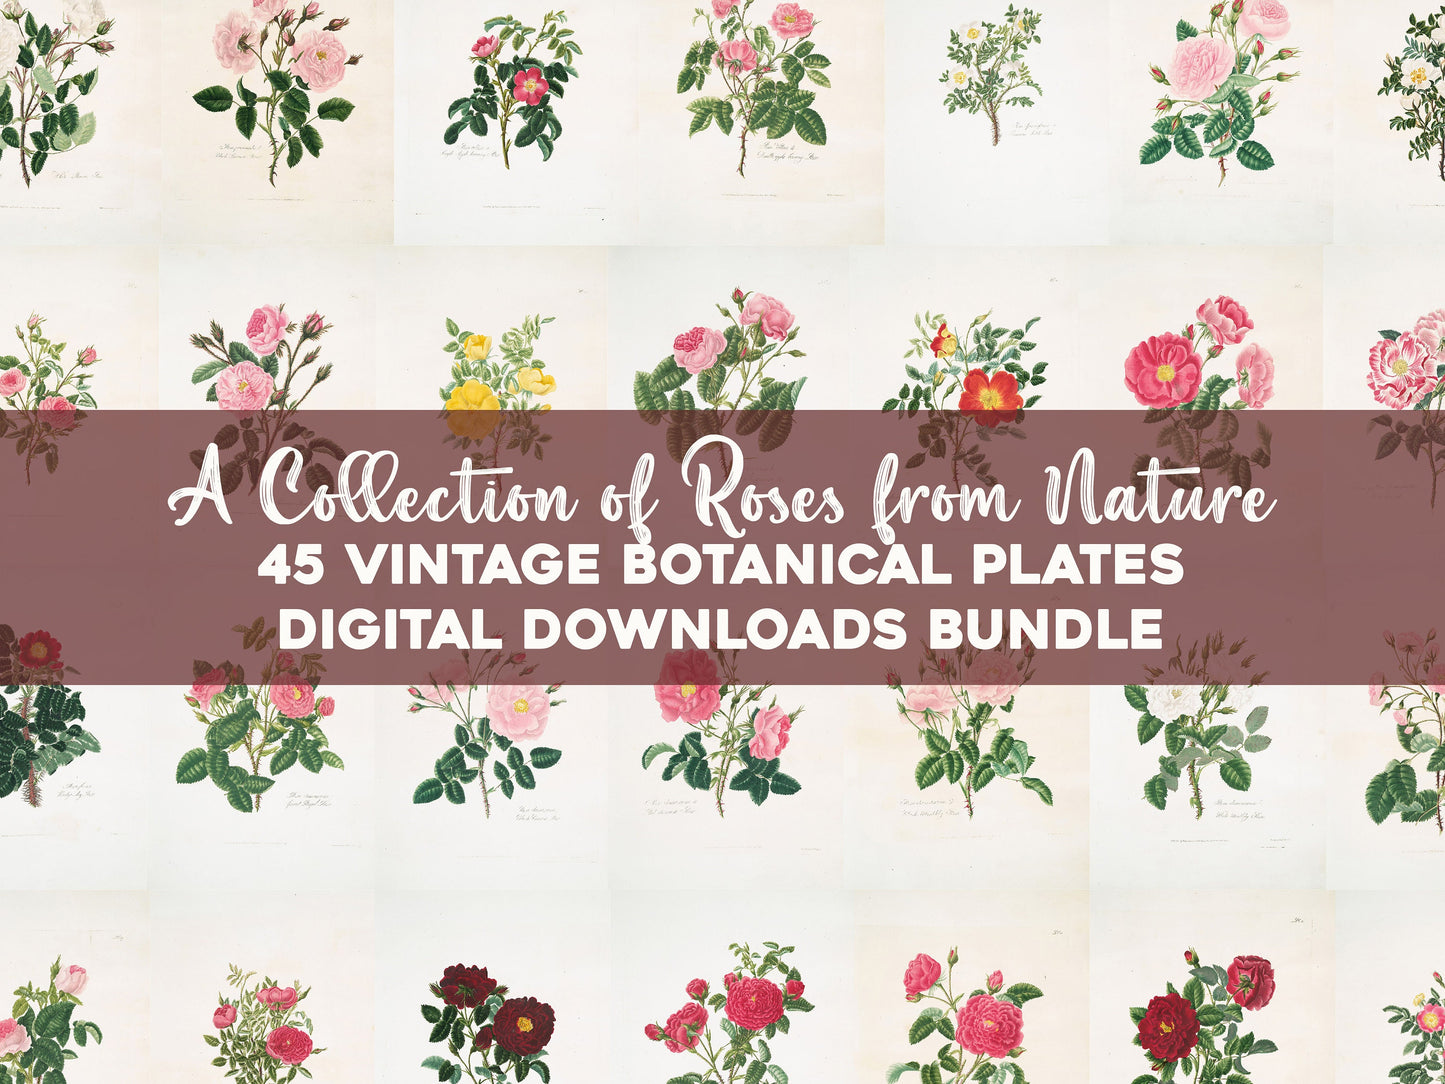 A Collection of Roses from Nature [45 Images]